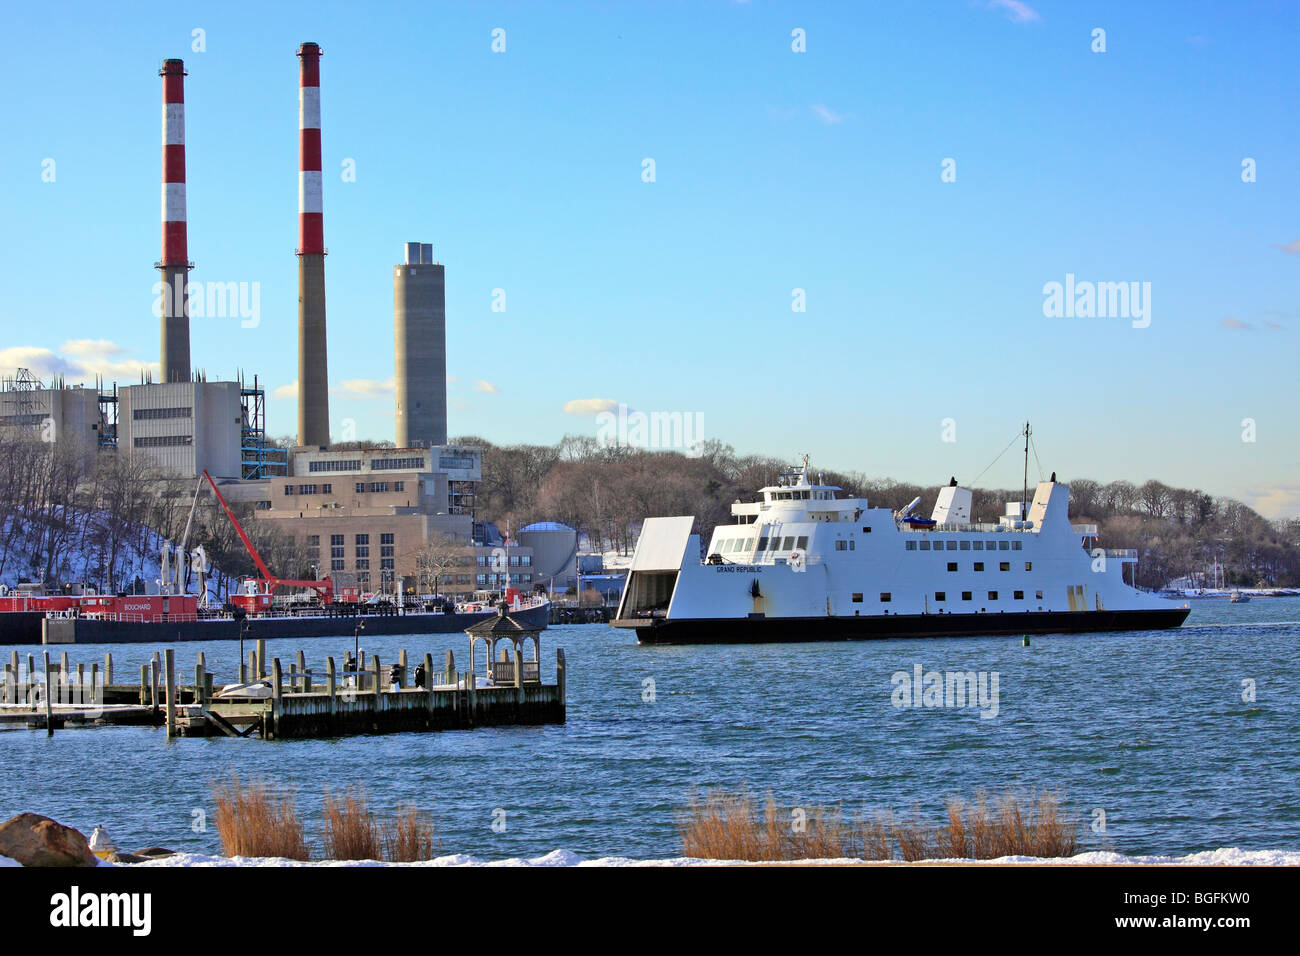 car and passenger ferry from bridgeport ct approaches dock at port